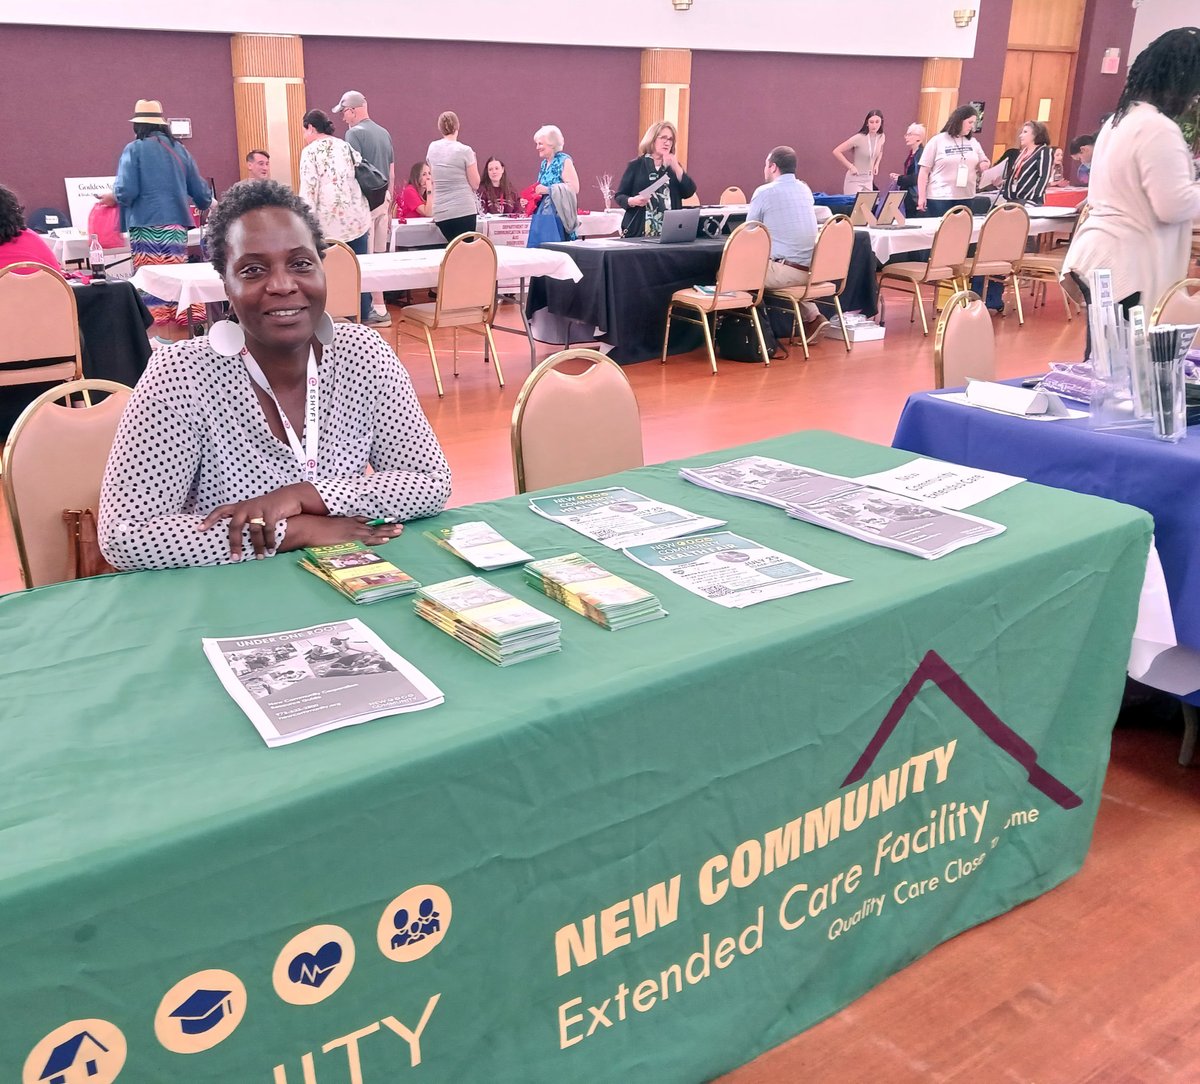 New Community Extended Care Facility participated in the @AdlerAphasia Center Getting the Word Out #Community Fair yesterday in West Orange. Director of Admissions Julienne Van-Nooten shared information about the skilled nursing facility and the services NCC provides.